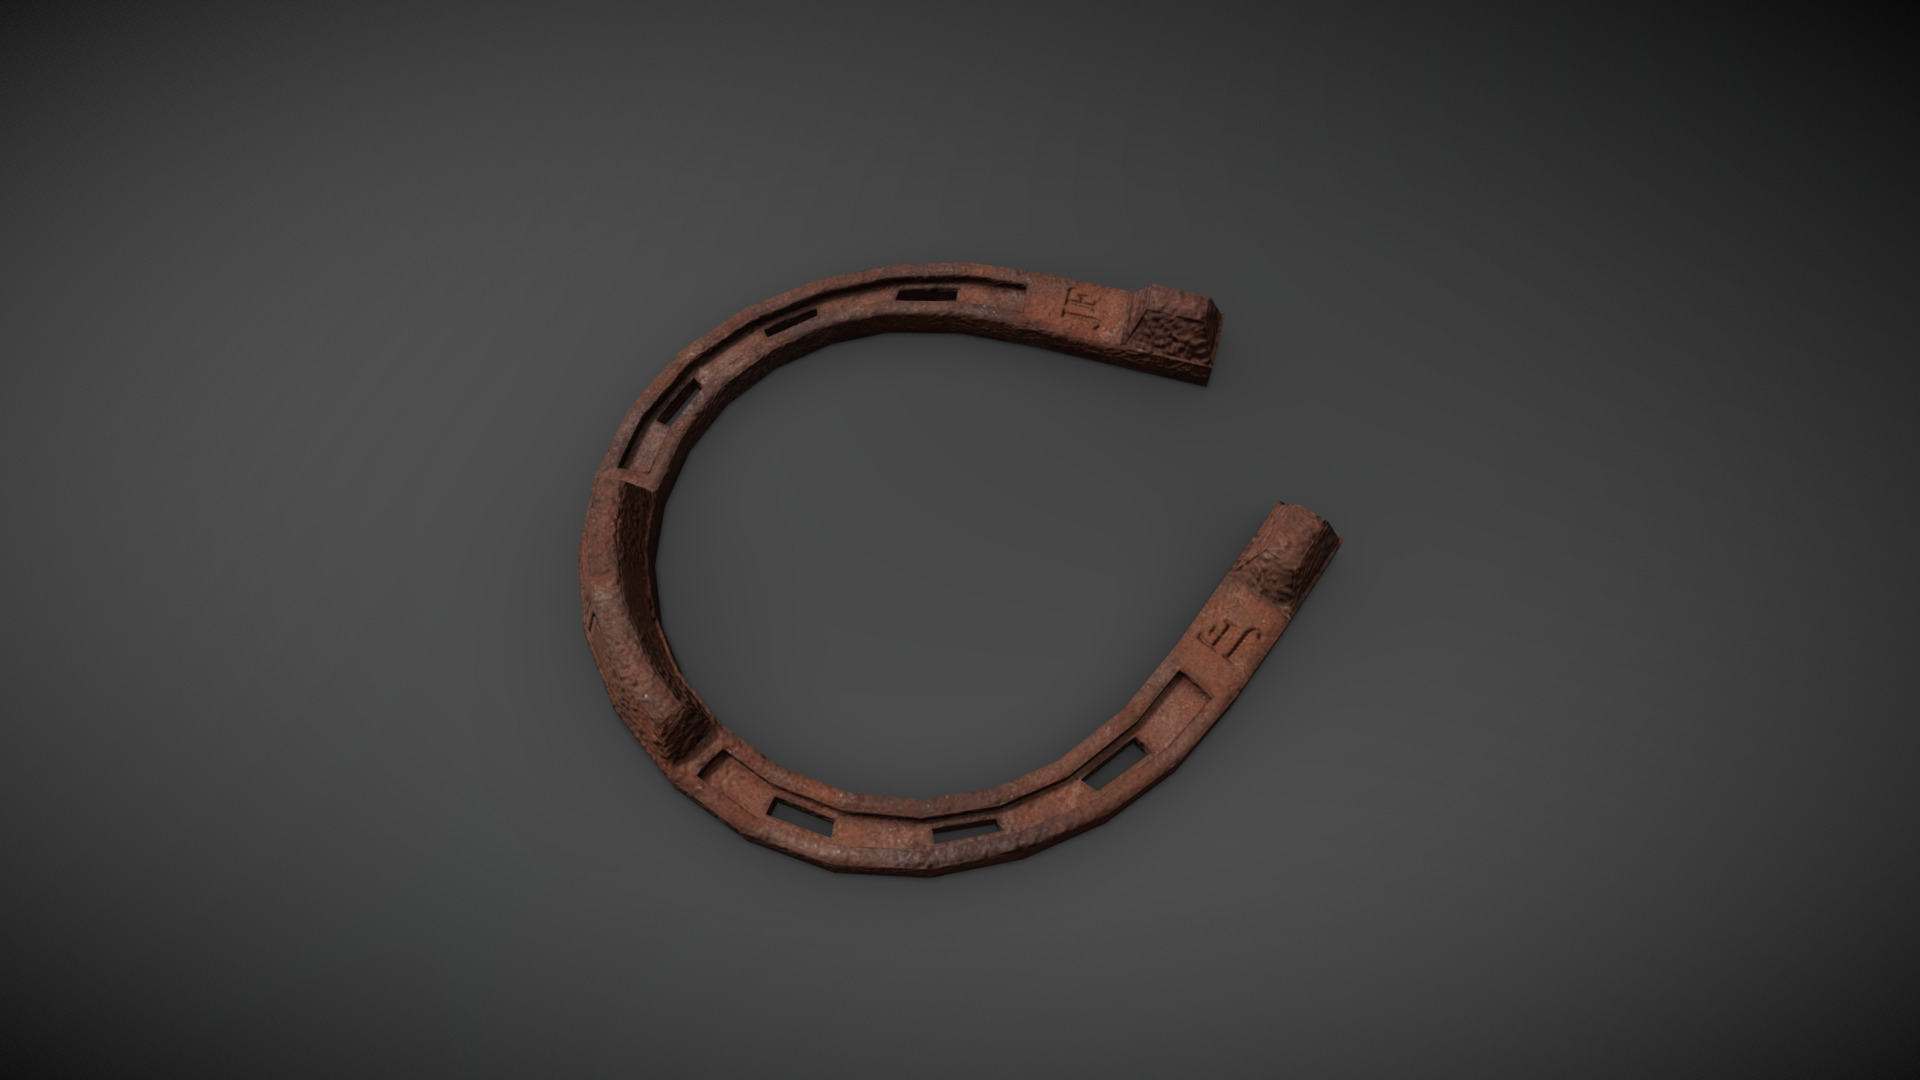 3D model Old Rusty Horseshoe - This is a 3D model of the Old Rusty Horseshoe. The 3D model is about a wooden ring with a stone on it.